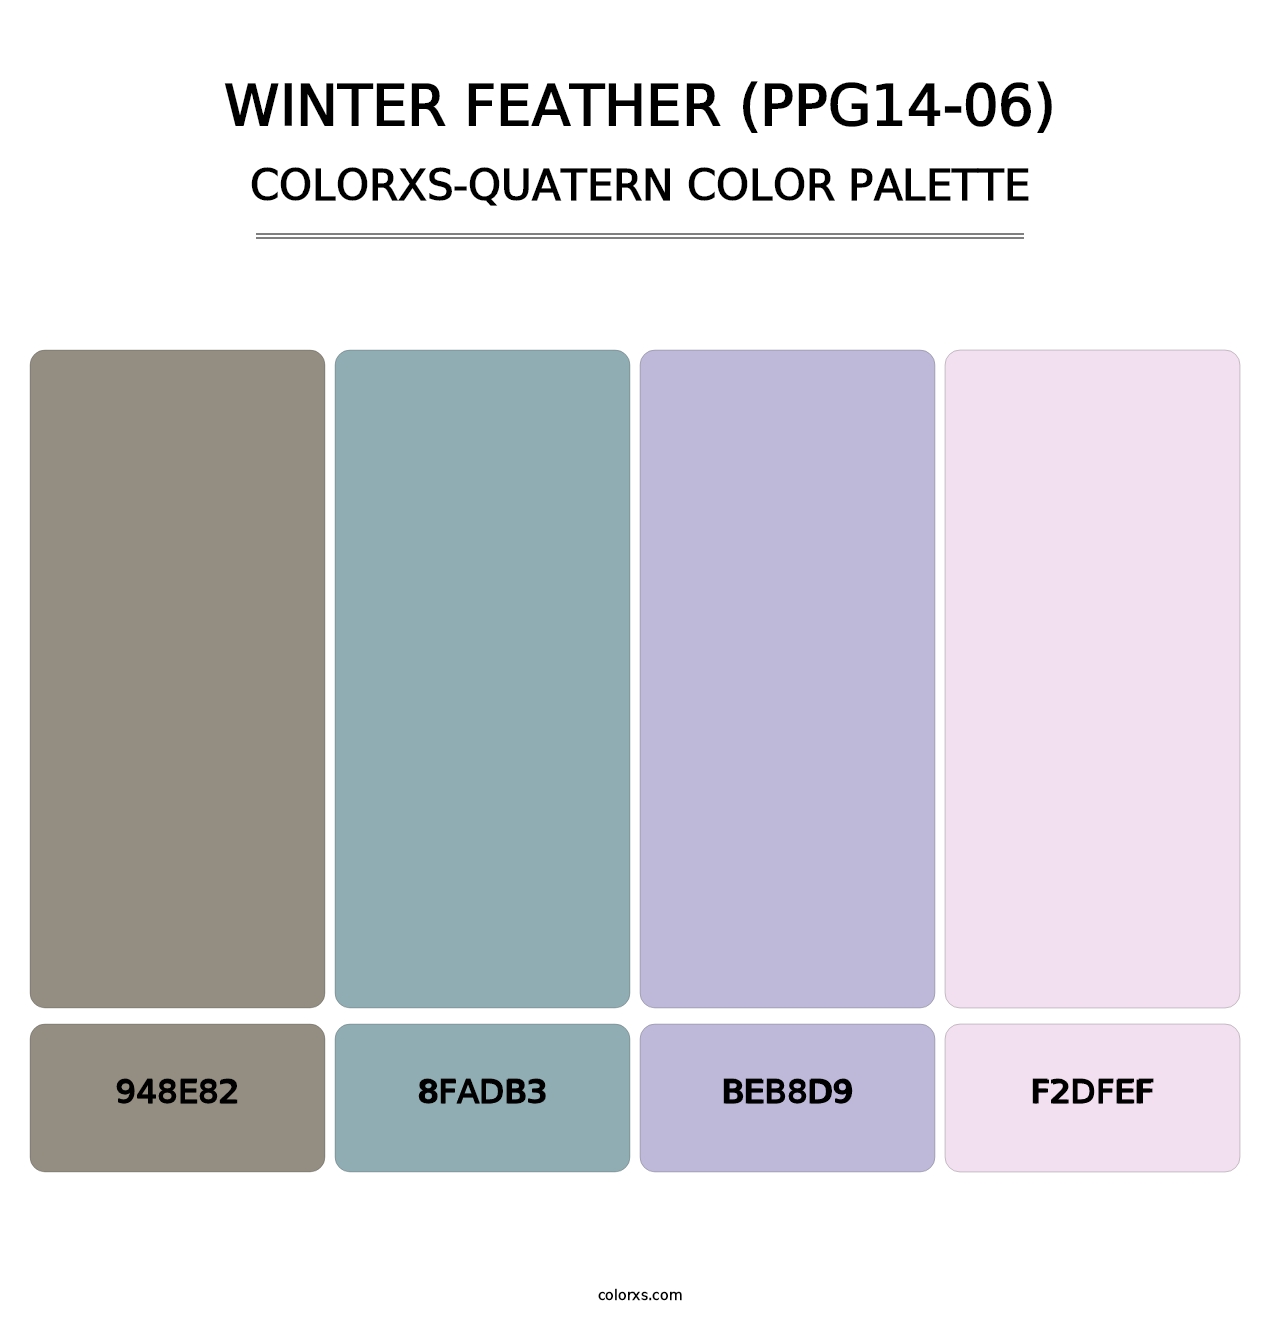 Winter Feather (PPG14-06) - Colorxs Quatern Palette